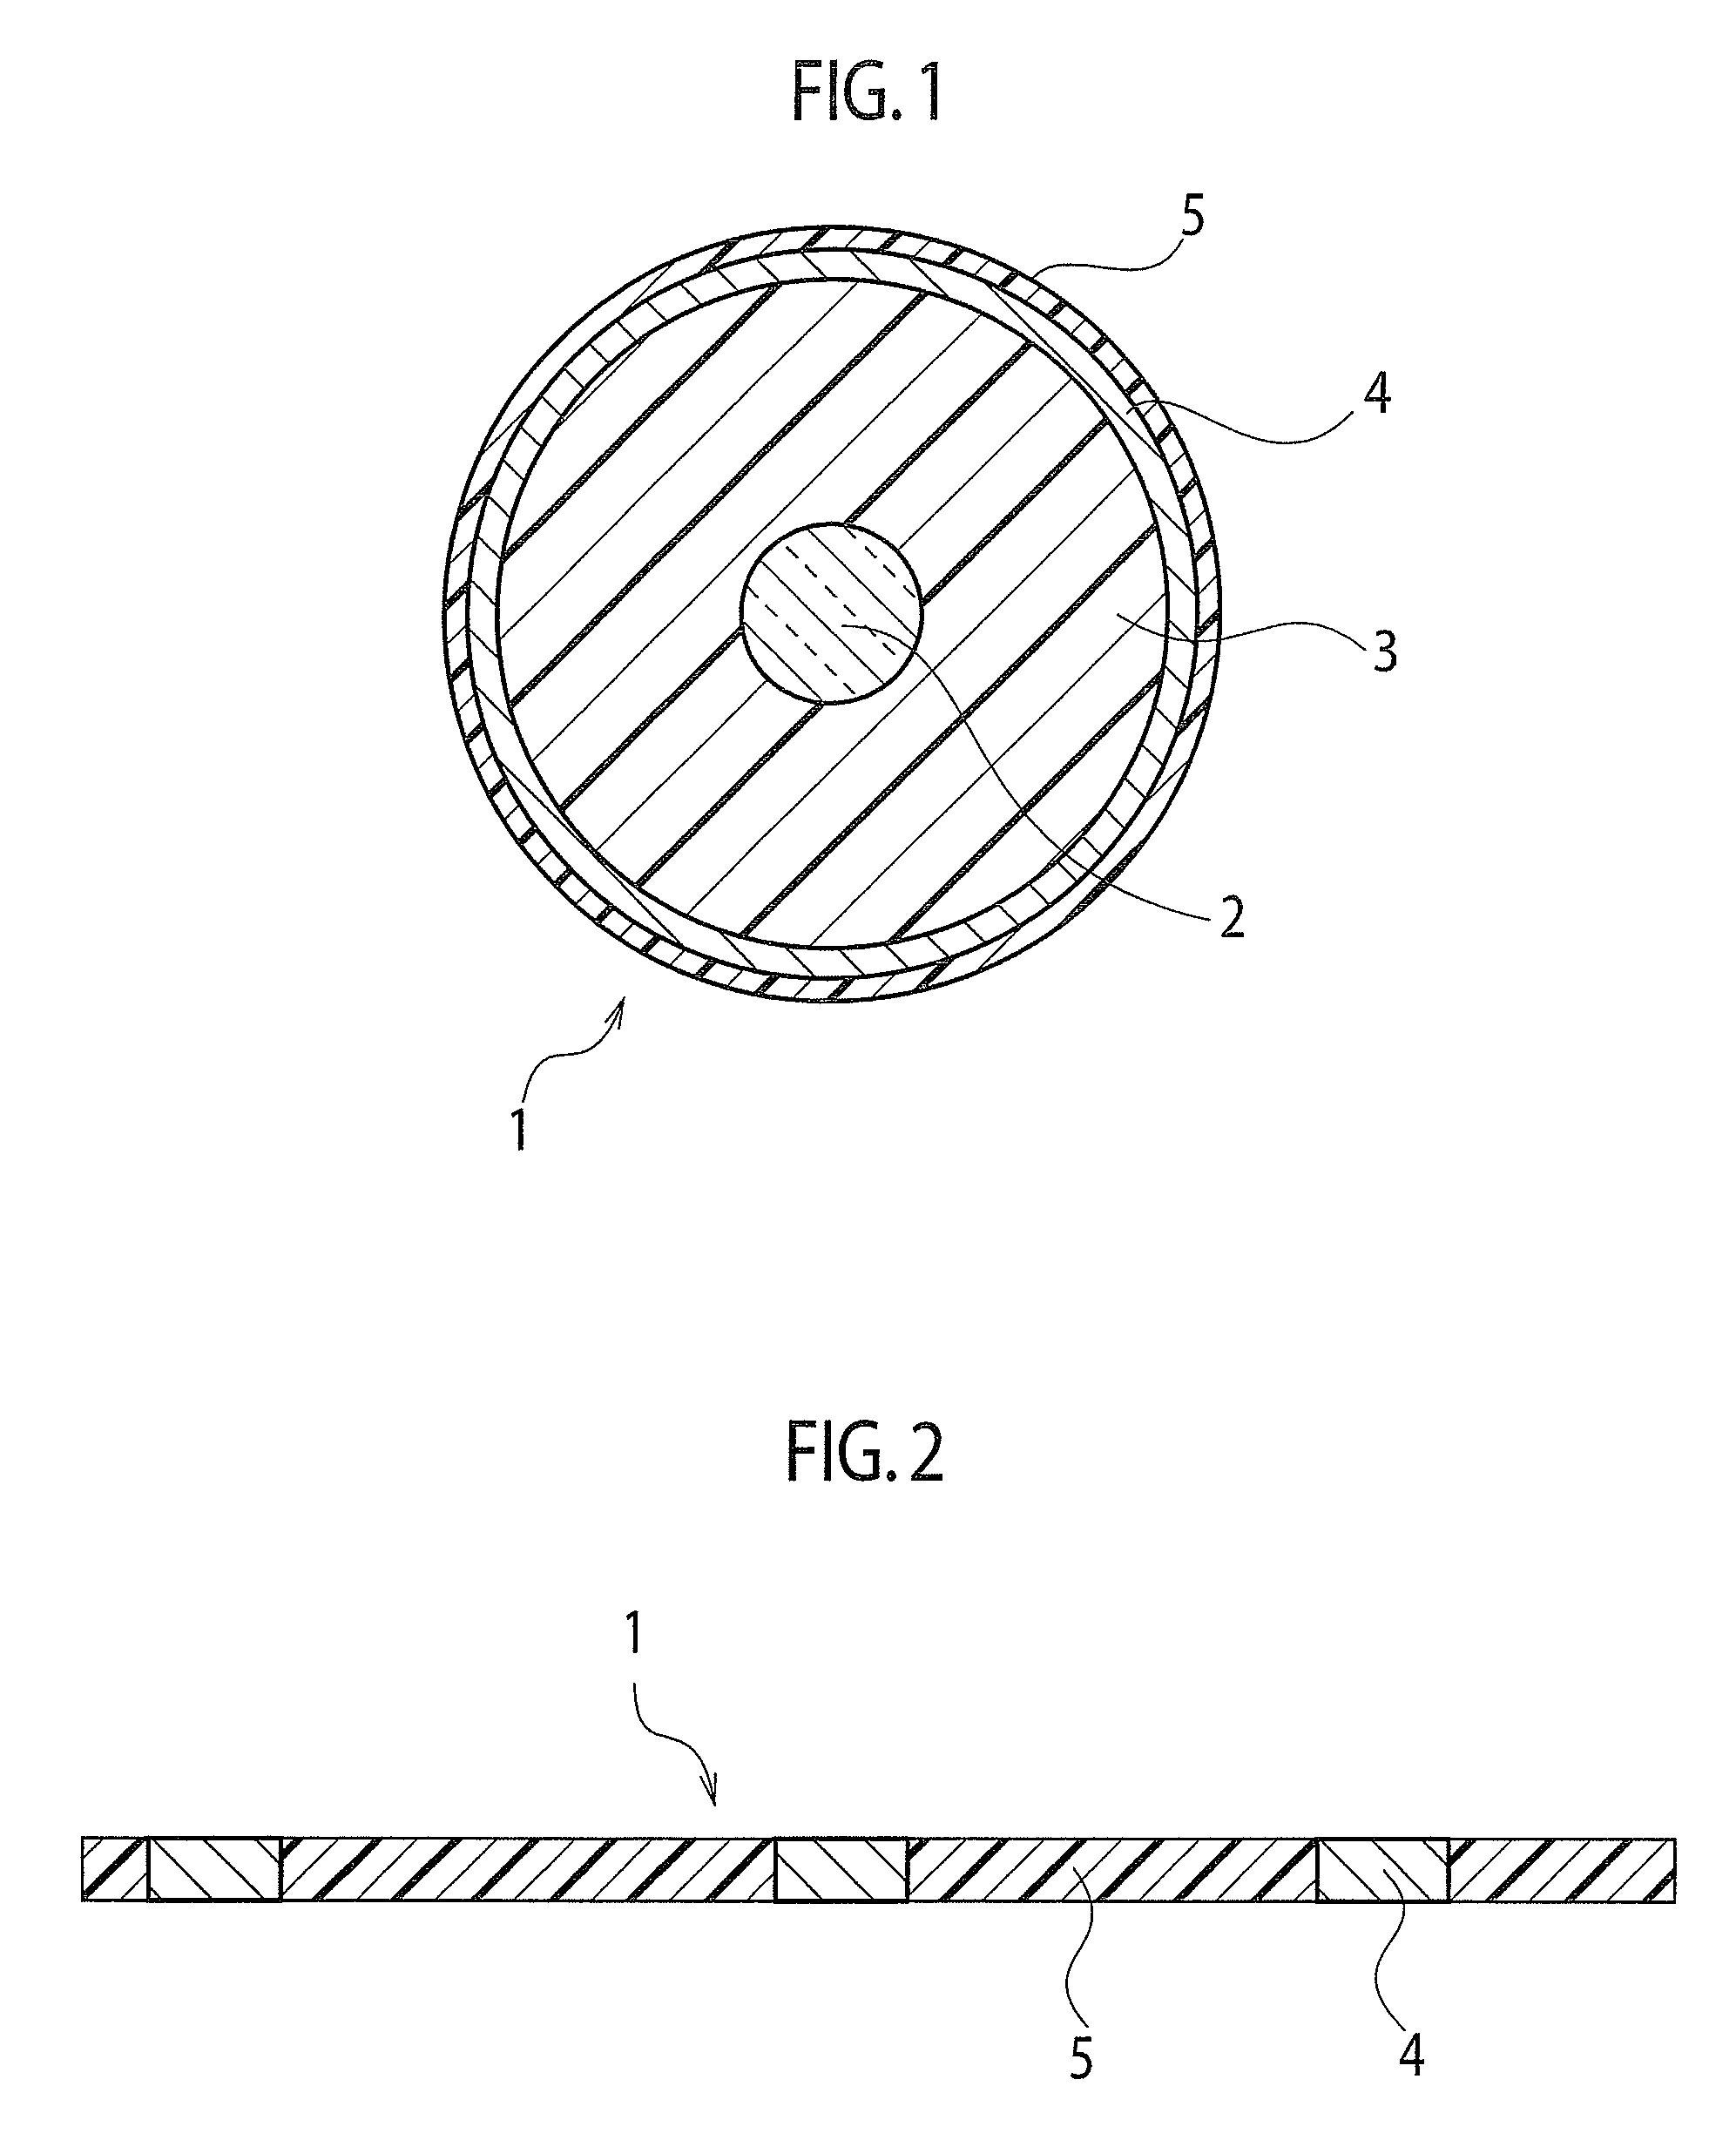 Optical fiber ribbon, optical fiber cable, and wire configuration, each having identification marking